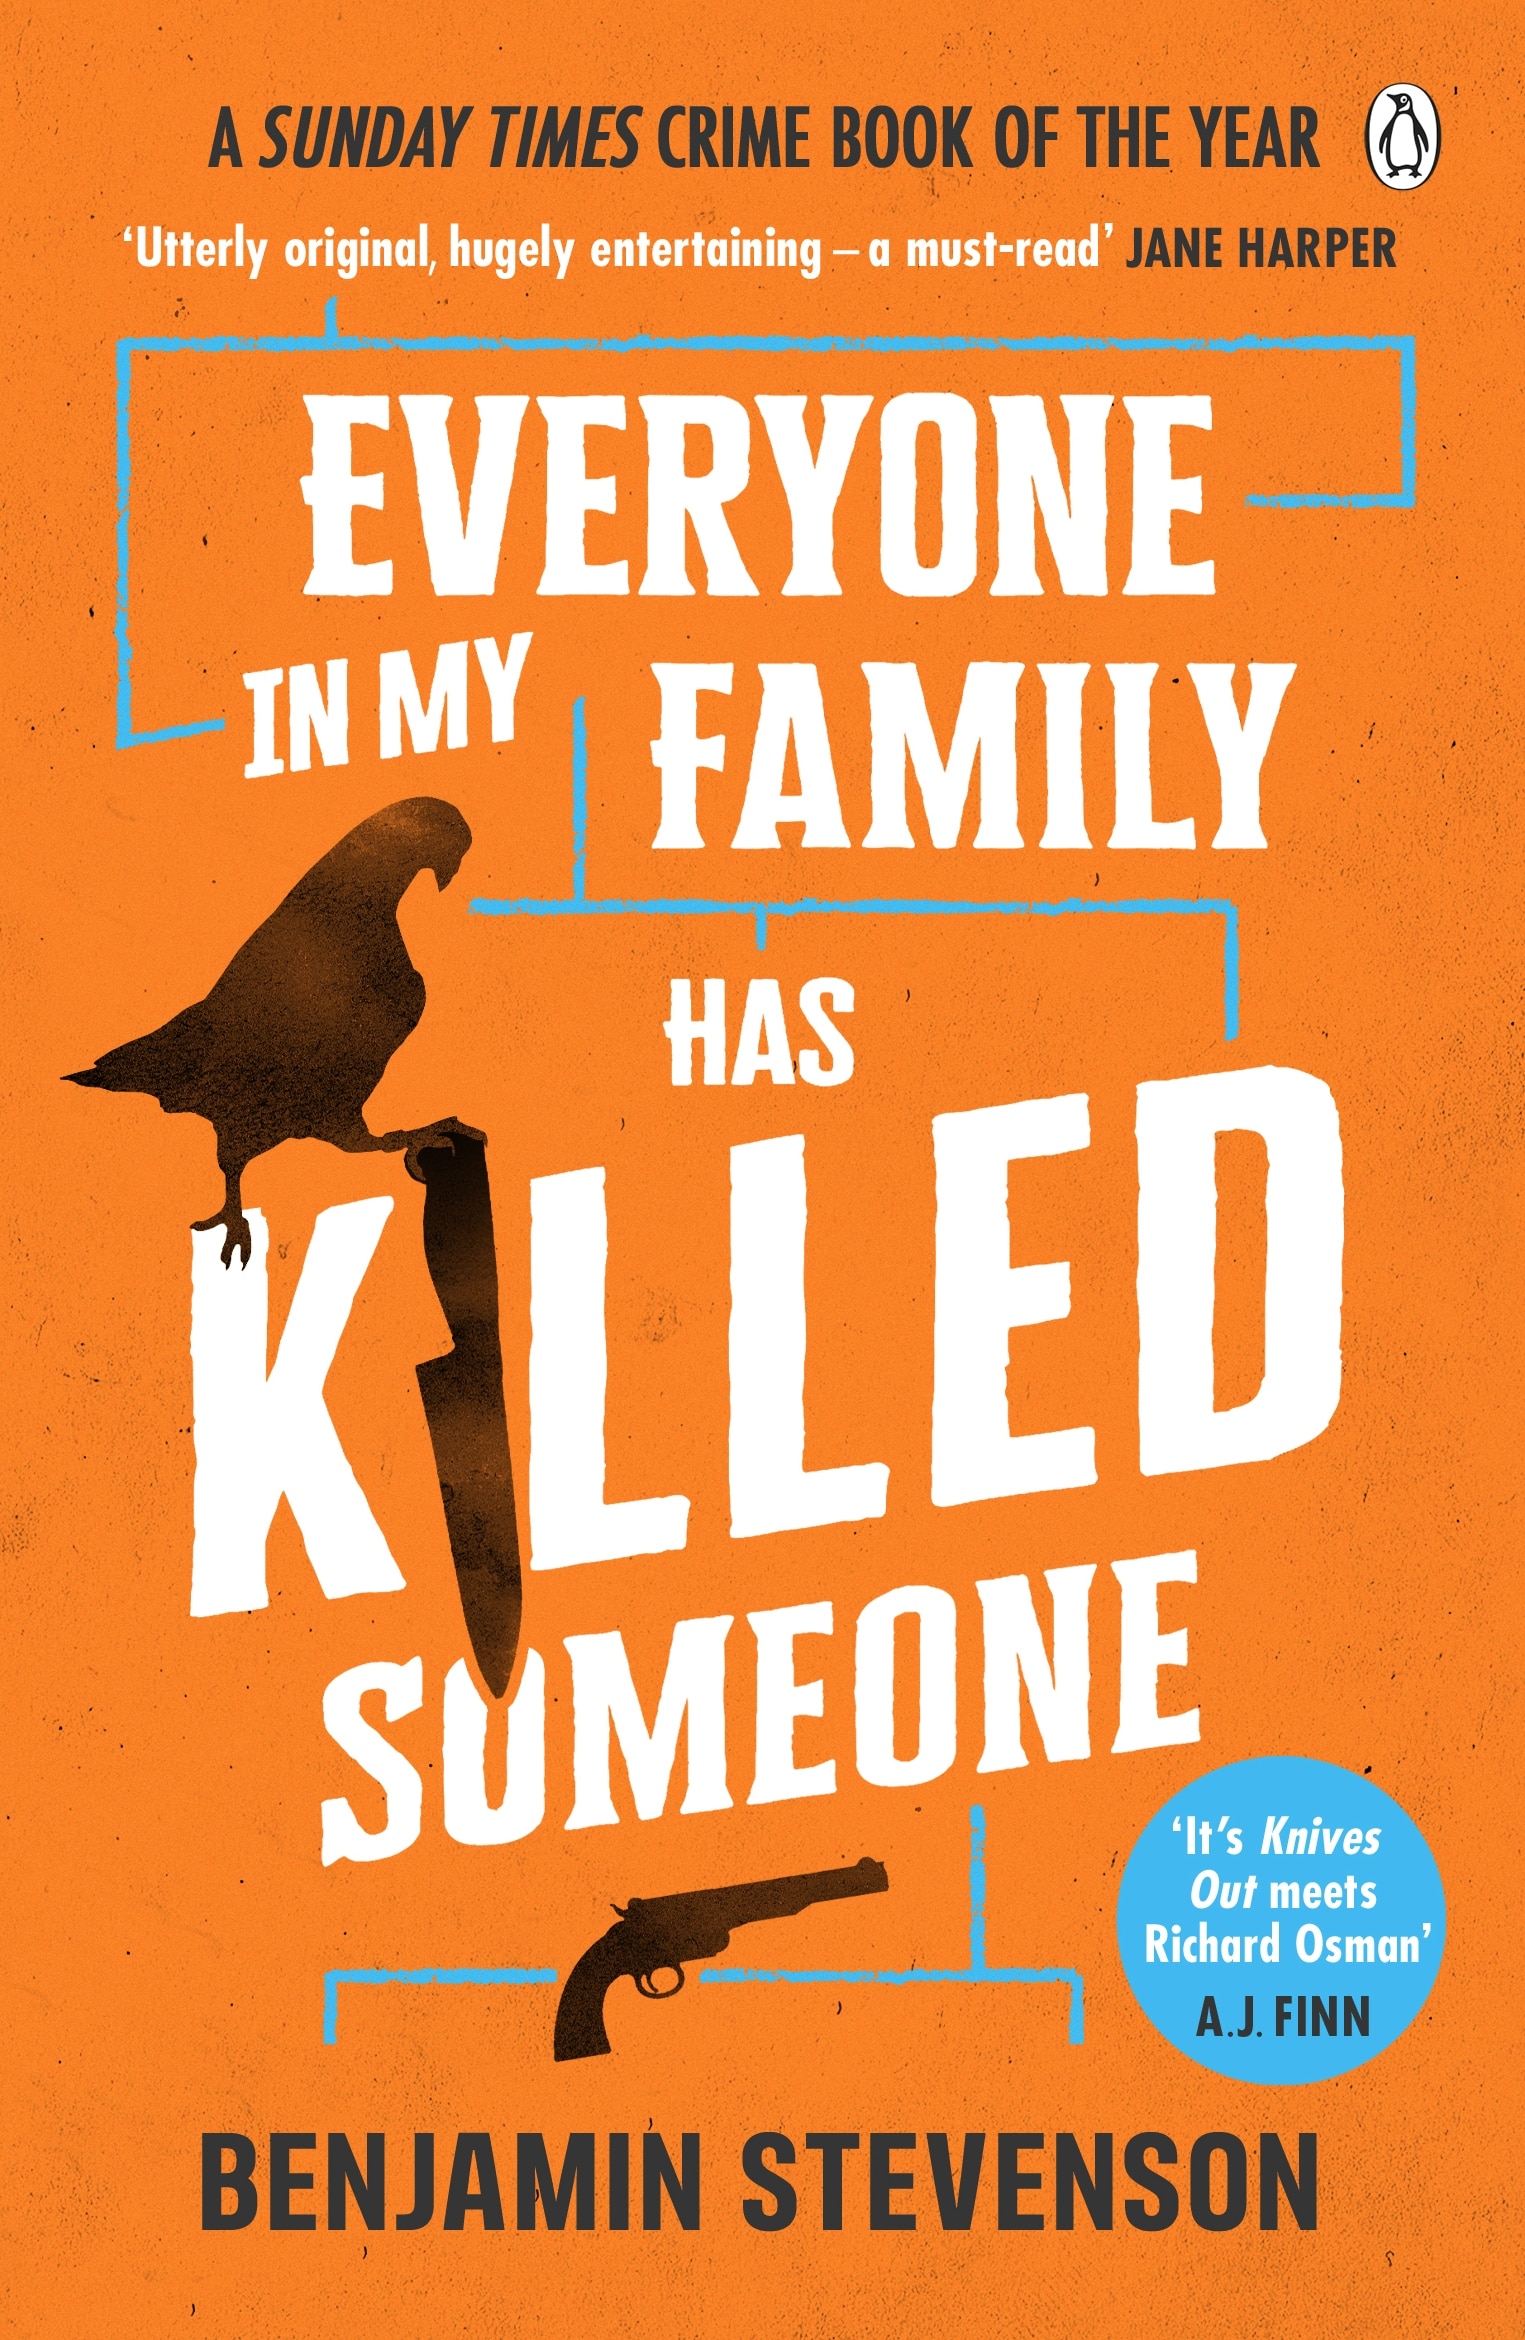 Book cover of Everyone in My Family Has Killed Someone by Benjamin Stevenson